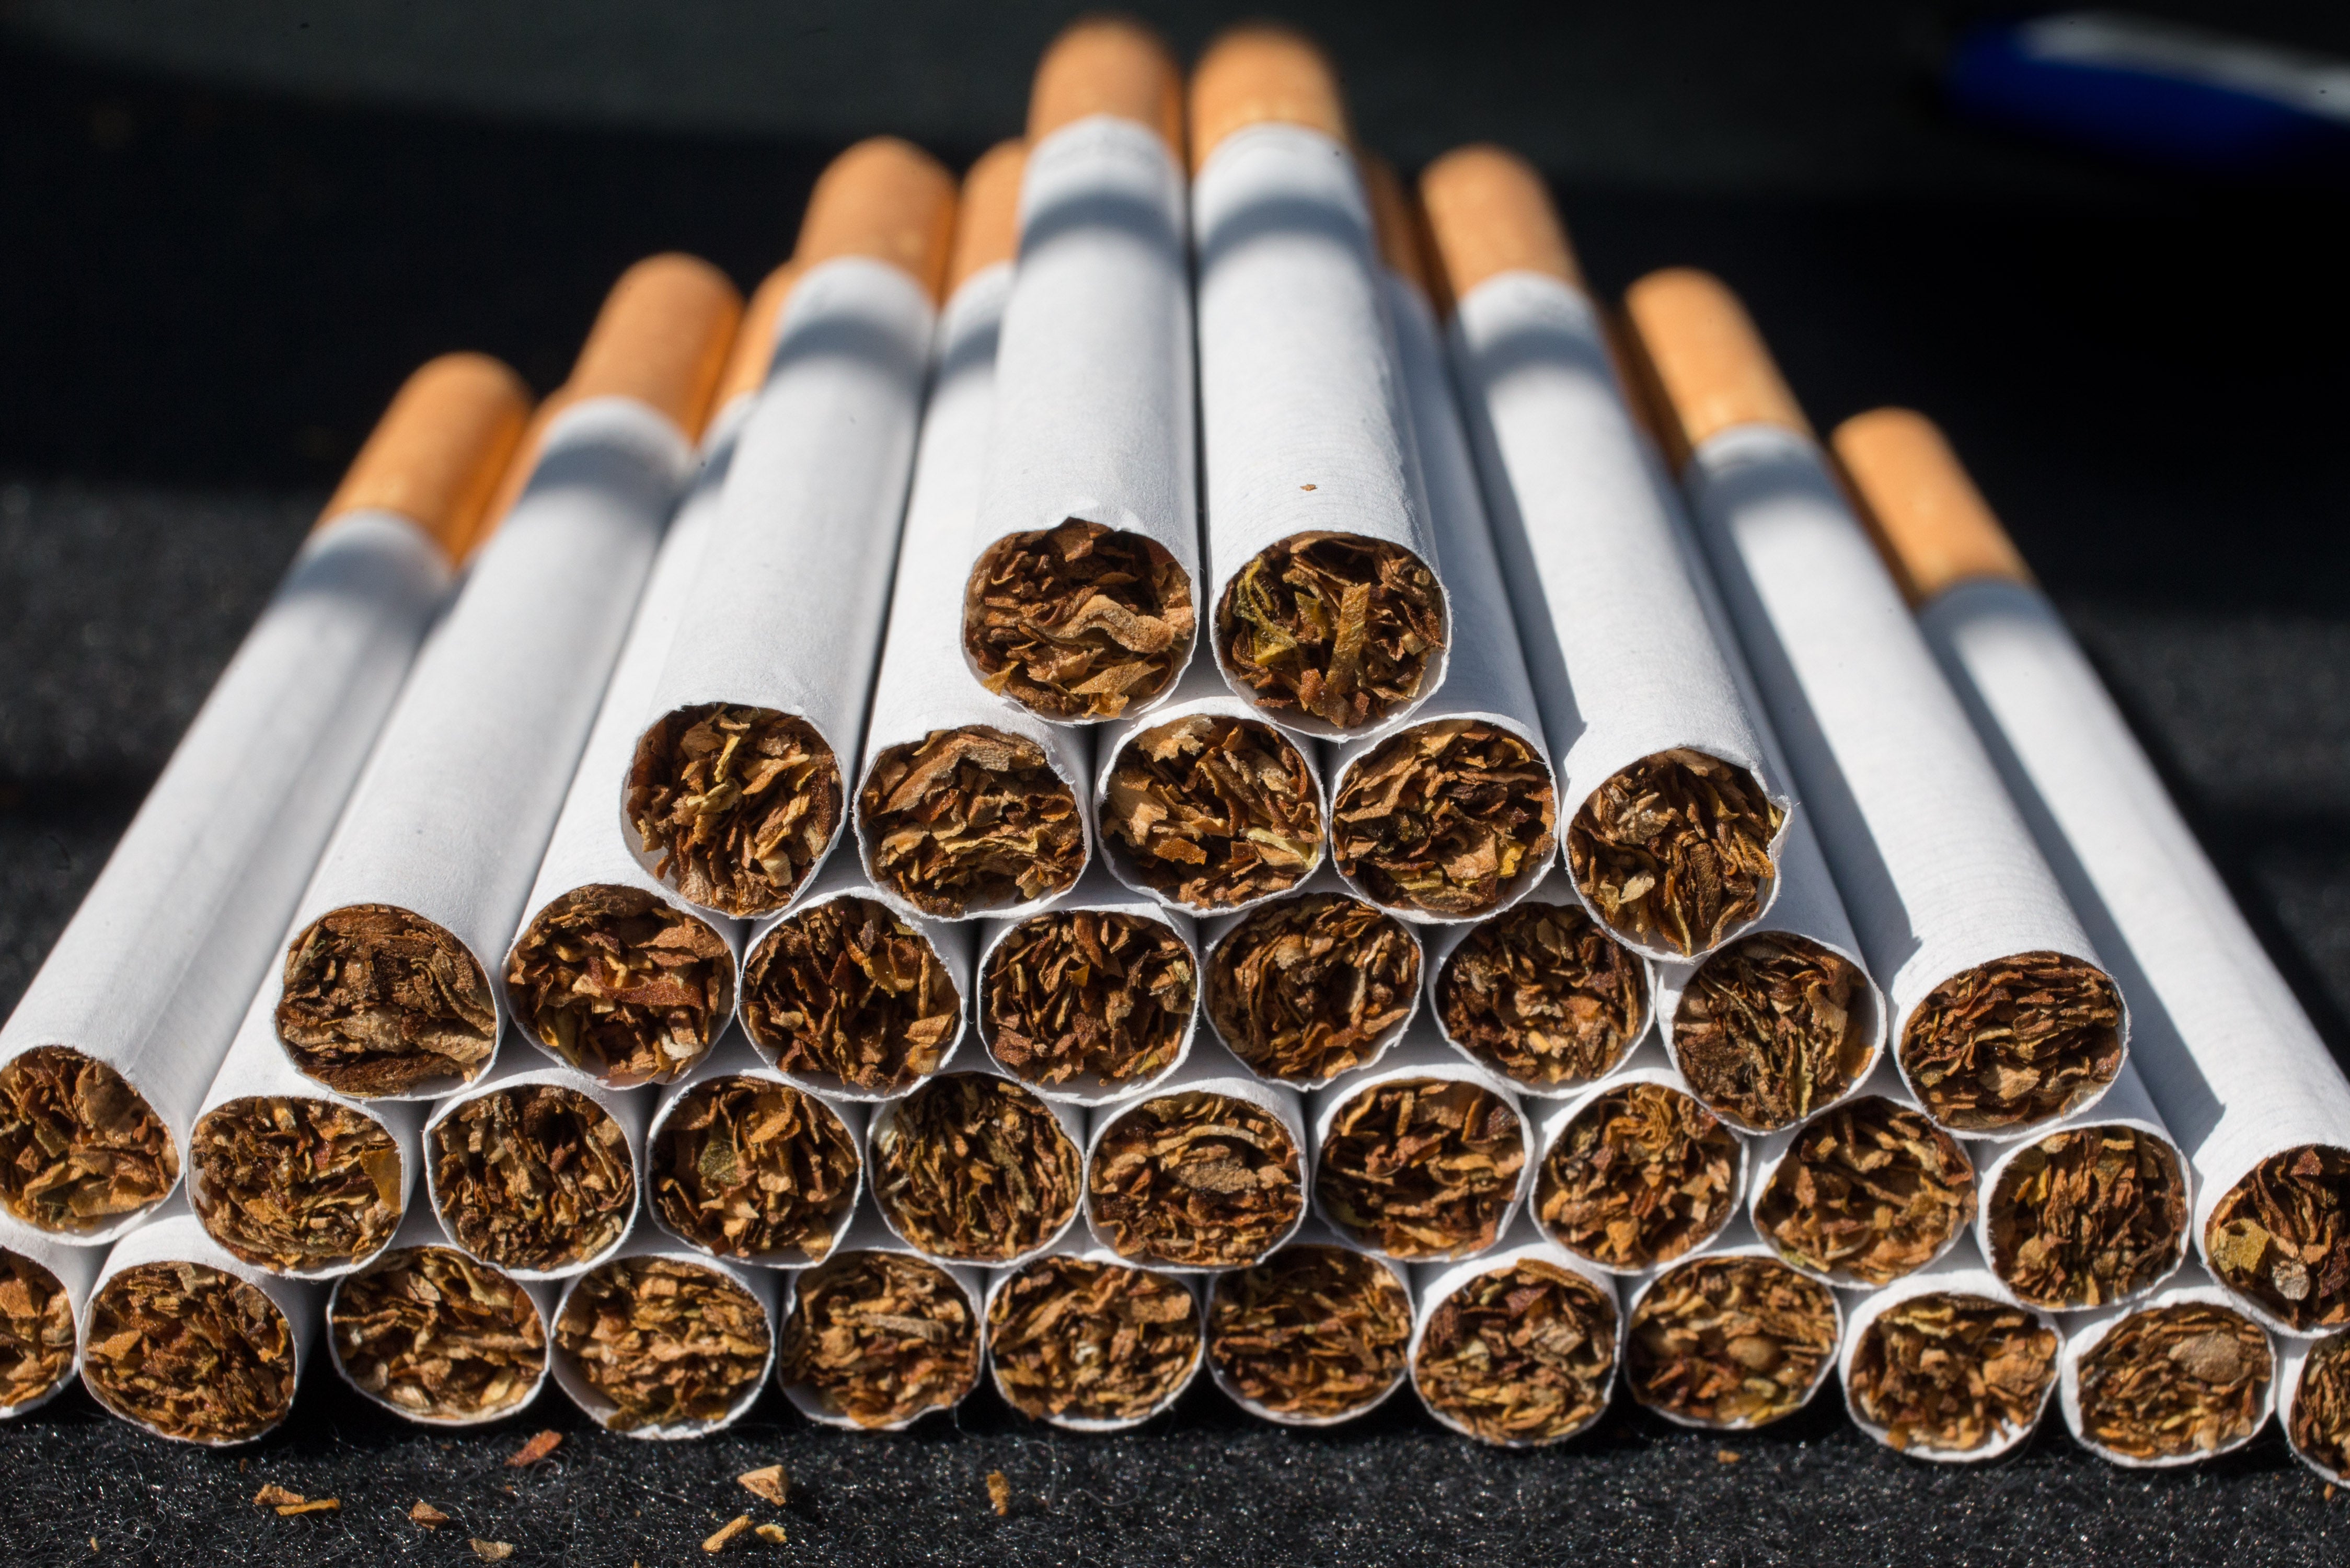 Around eight million people die every year for reasons connected to smoking, according to the World Health Organisation